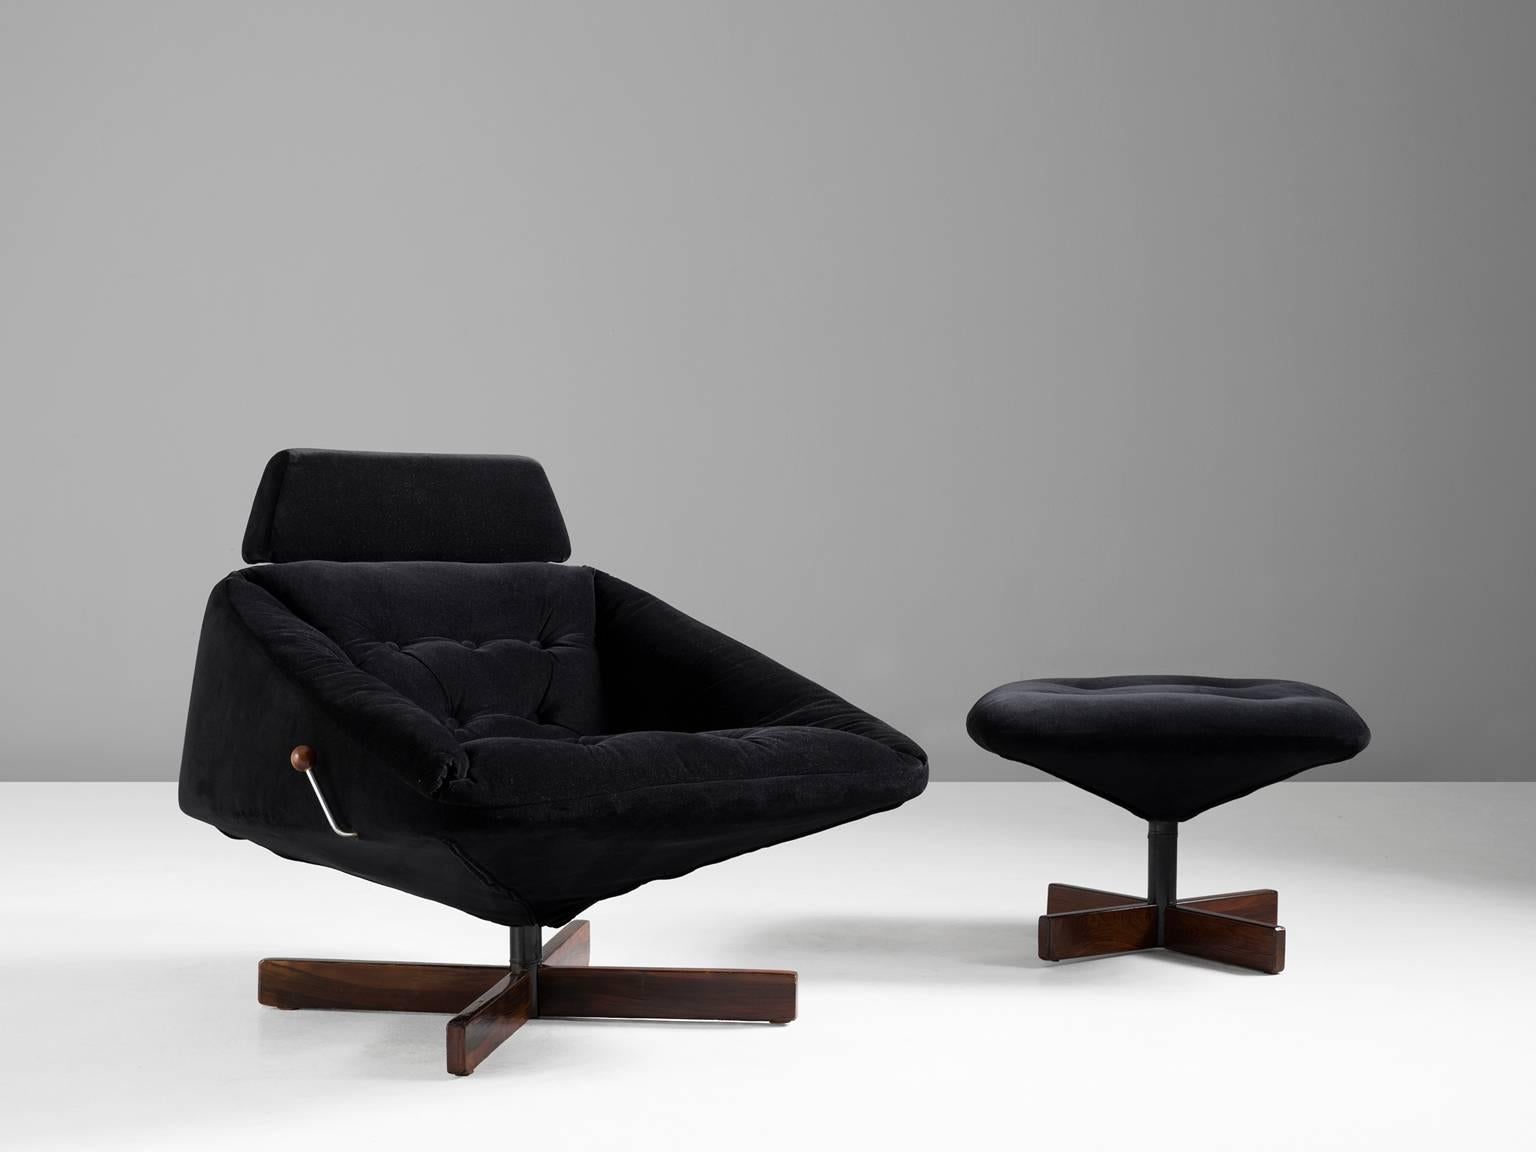 Lounge chair, in wood, metal and fabric, by Percival Lafer, Brazil, 1970s. 

Swivel lounge chair with adjustable headrest and footstool in black velvet mohair-like upholstery. The X-shaped leg of Brazilian wood makes a nice combination with the